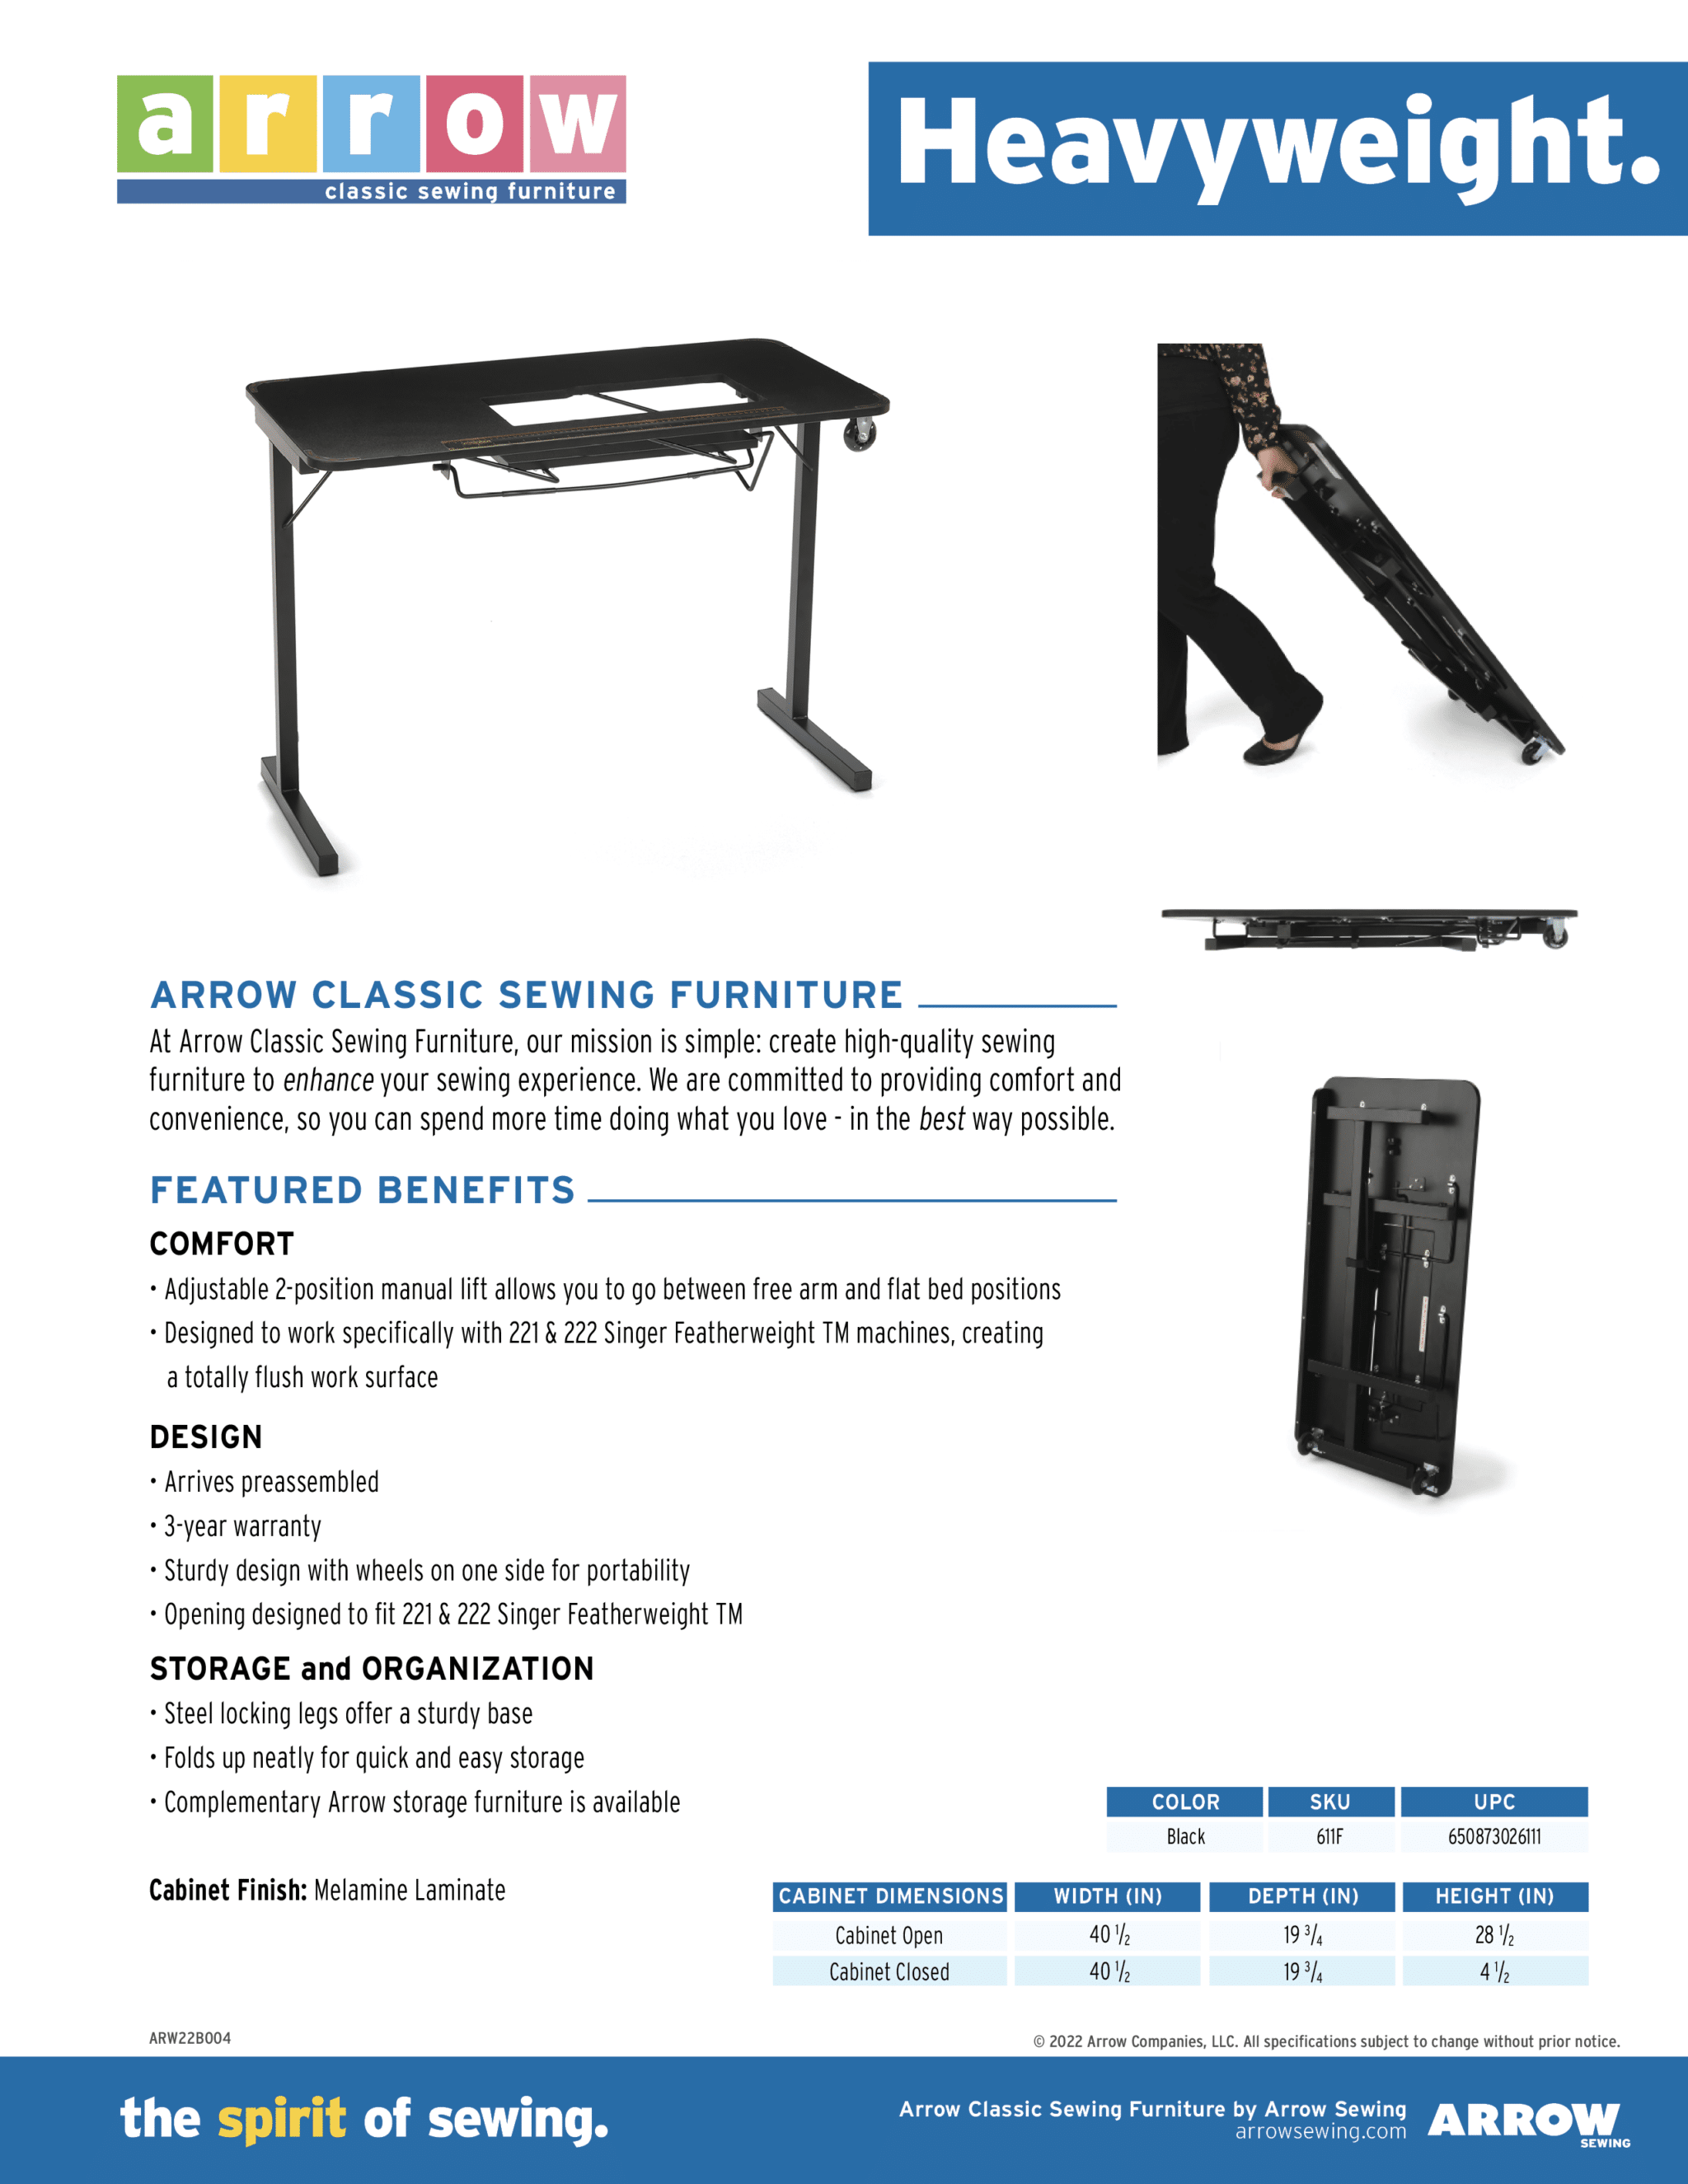 heavyweight sewing table